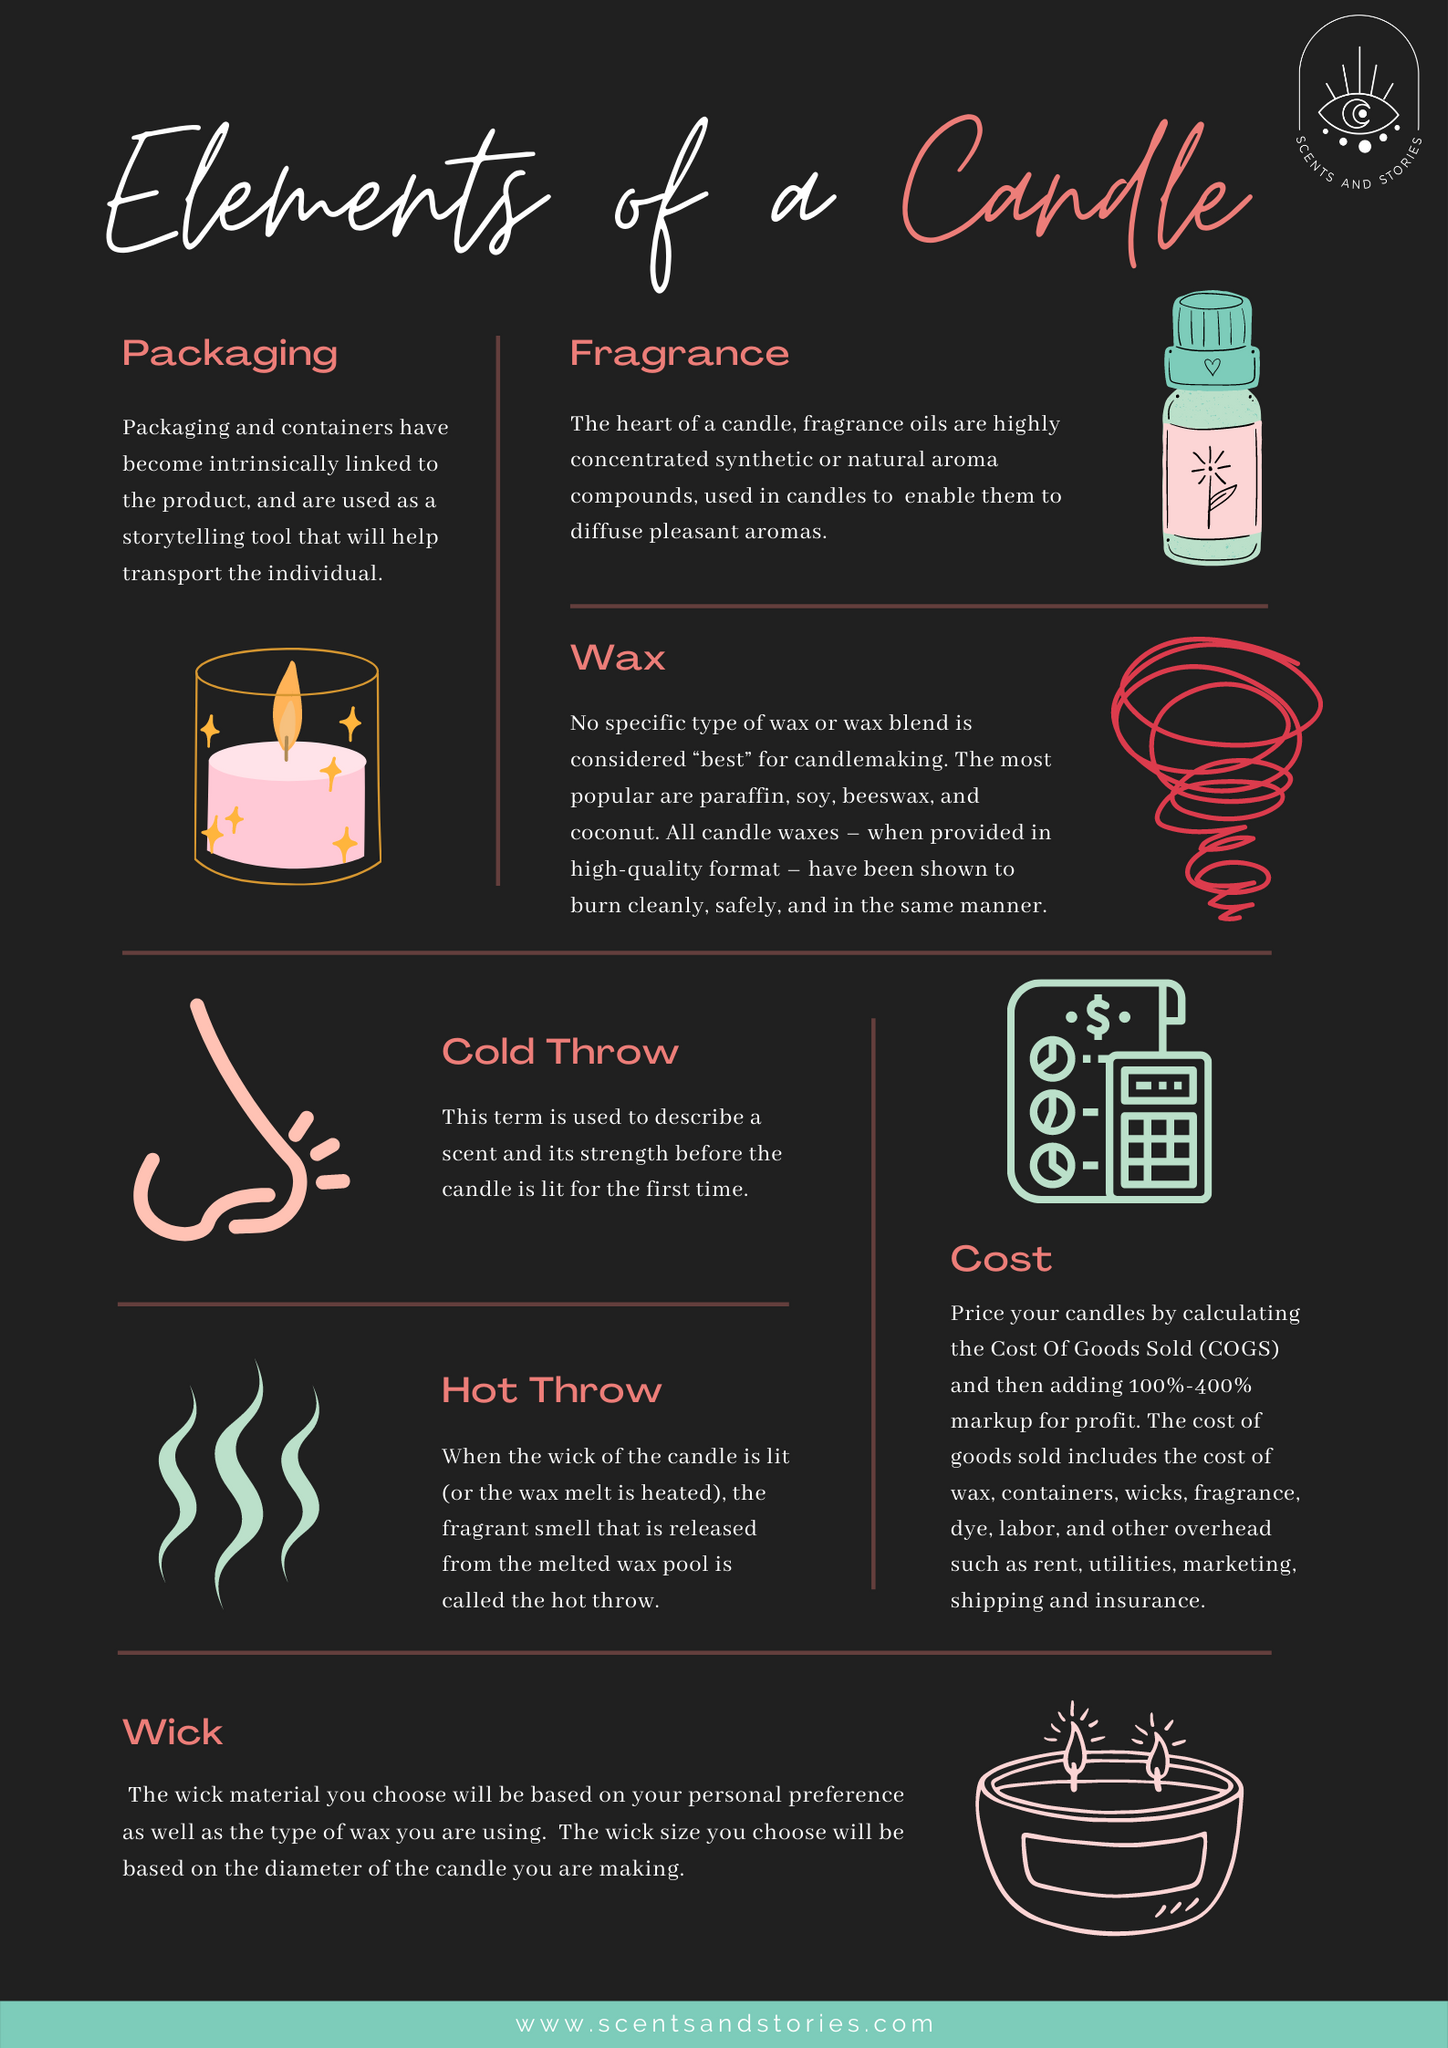 Elements of a candle